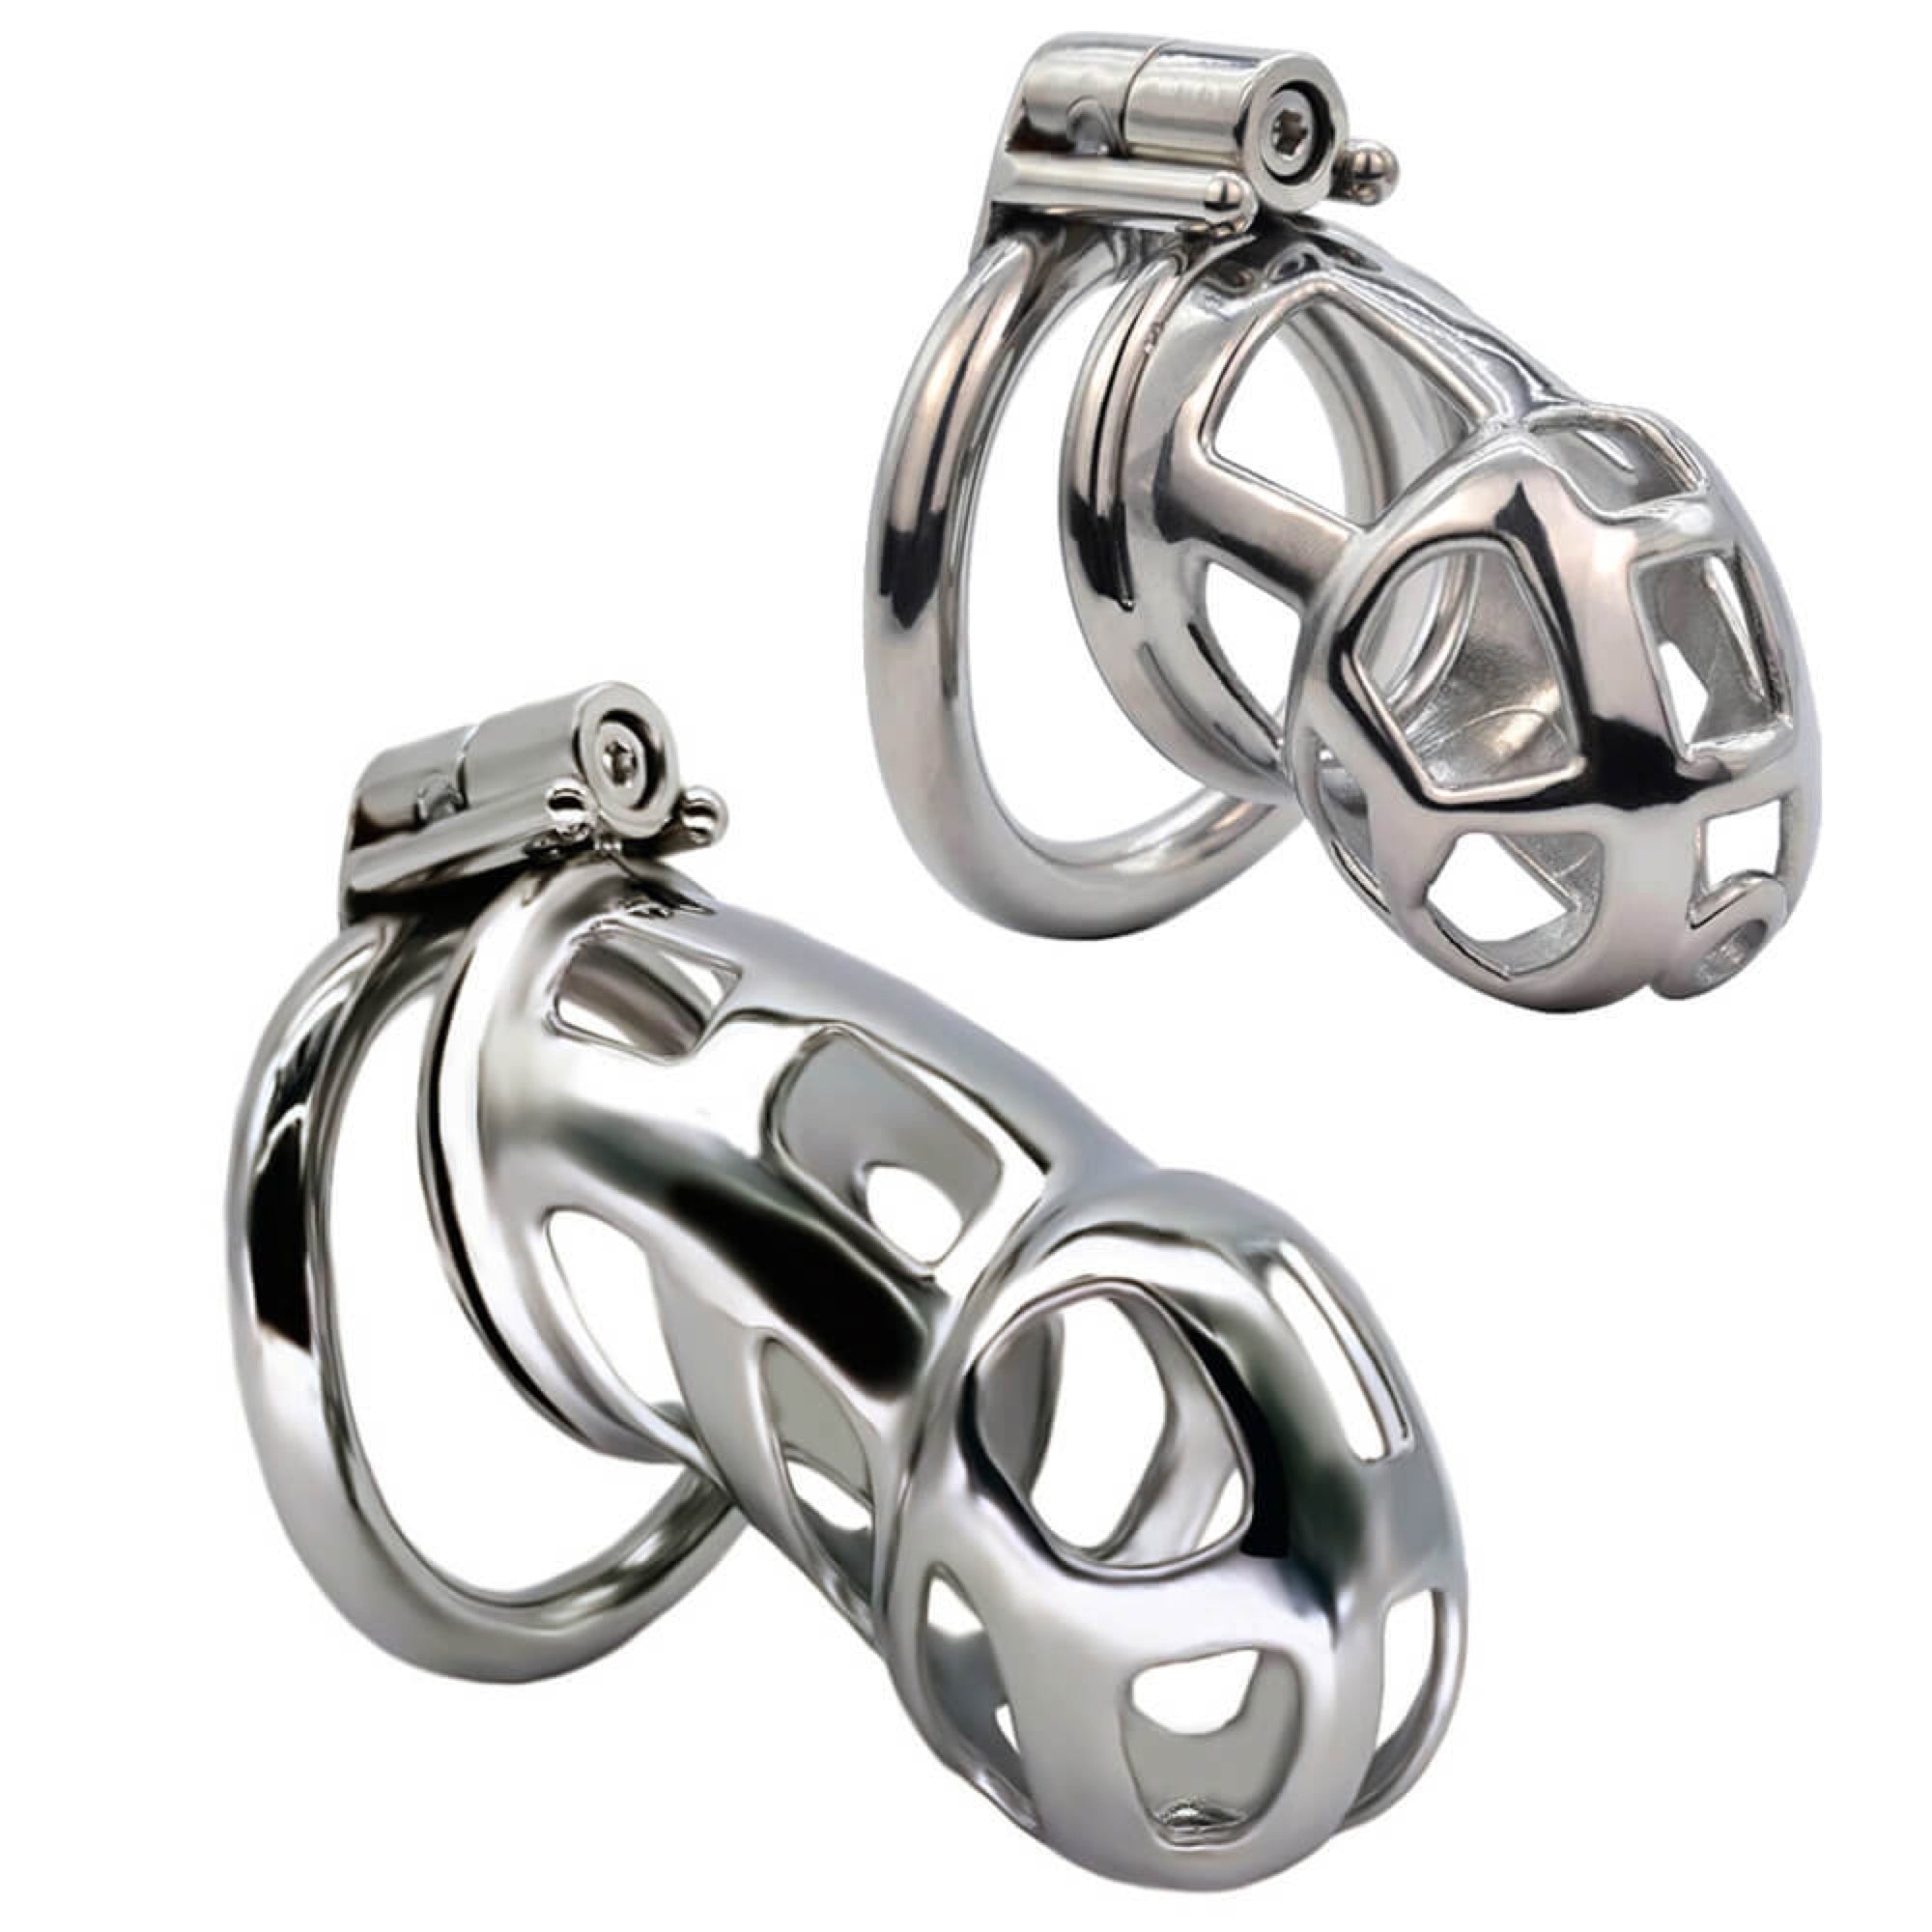 Mamba Chastity Cage 2.56 to 3.74 inches Long – cobrachastity